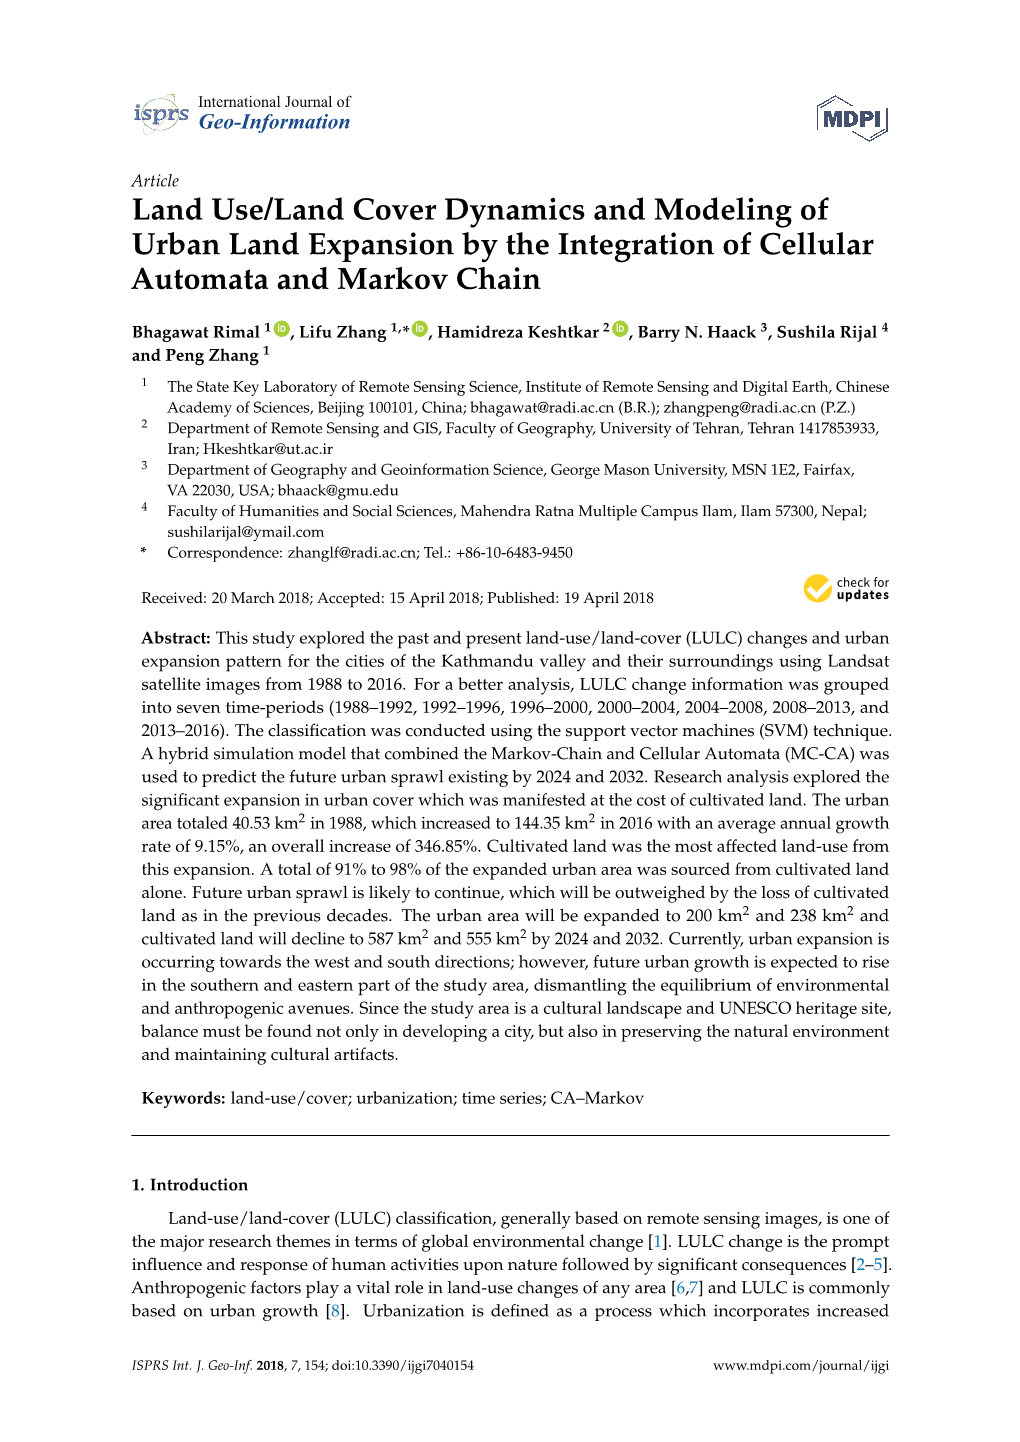 Land Use/Land Cover Dynamics and Modeling of Urban Land Expansion by the Integration of Cellular Automata and Markov Chain